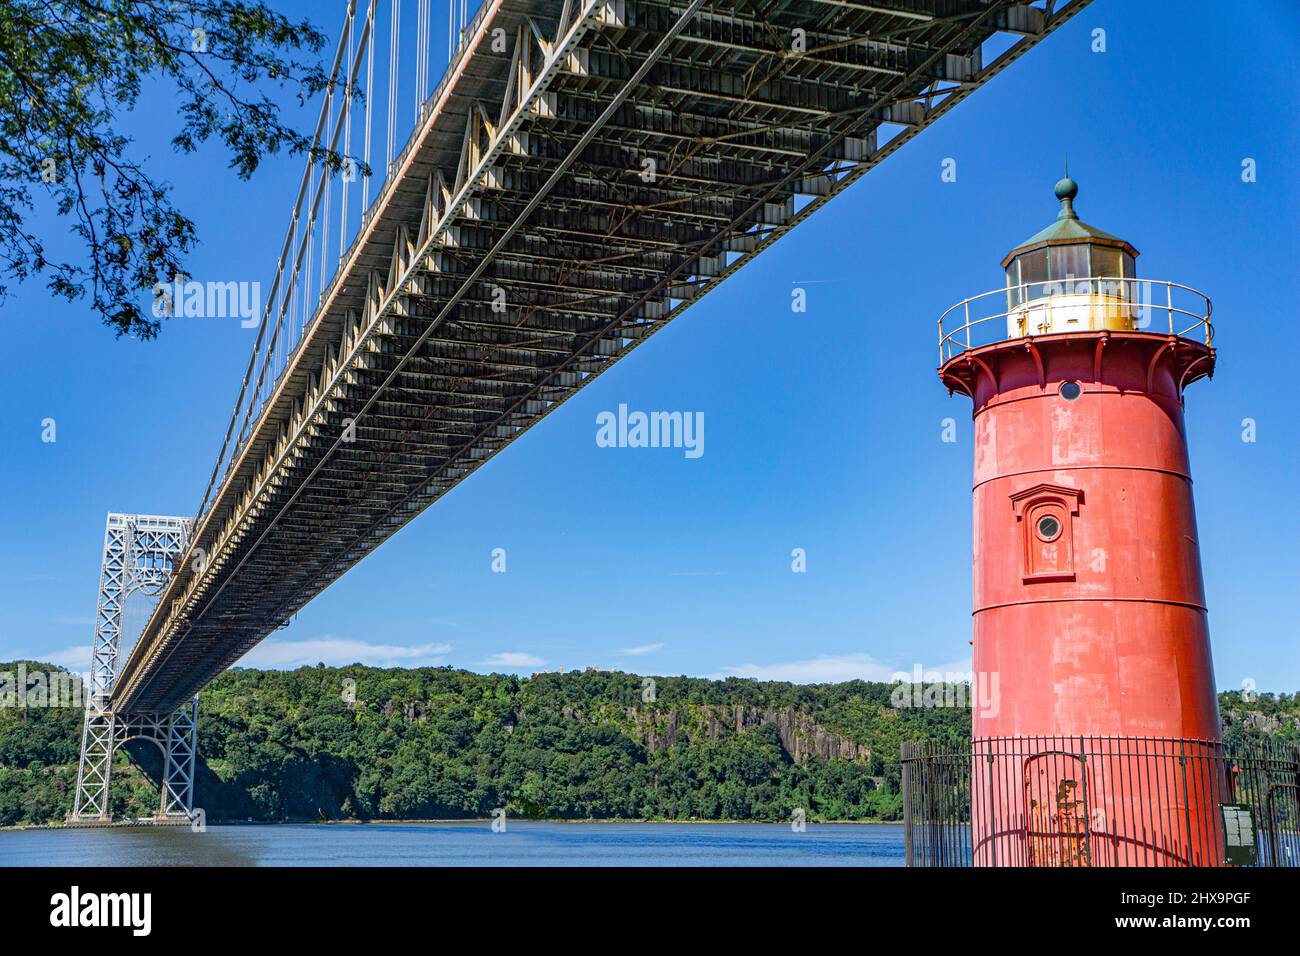 George Washington Bridge and Red Light House, Hudson River, connecting New York City, New York (foreground) and Fort Lee, New Jersey (background), USA Stock Photo